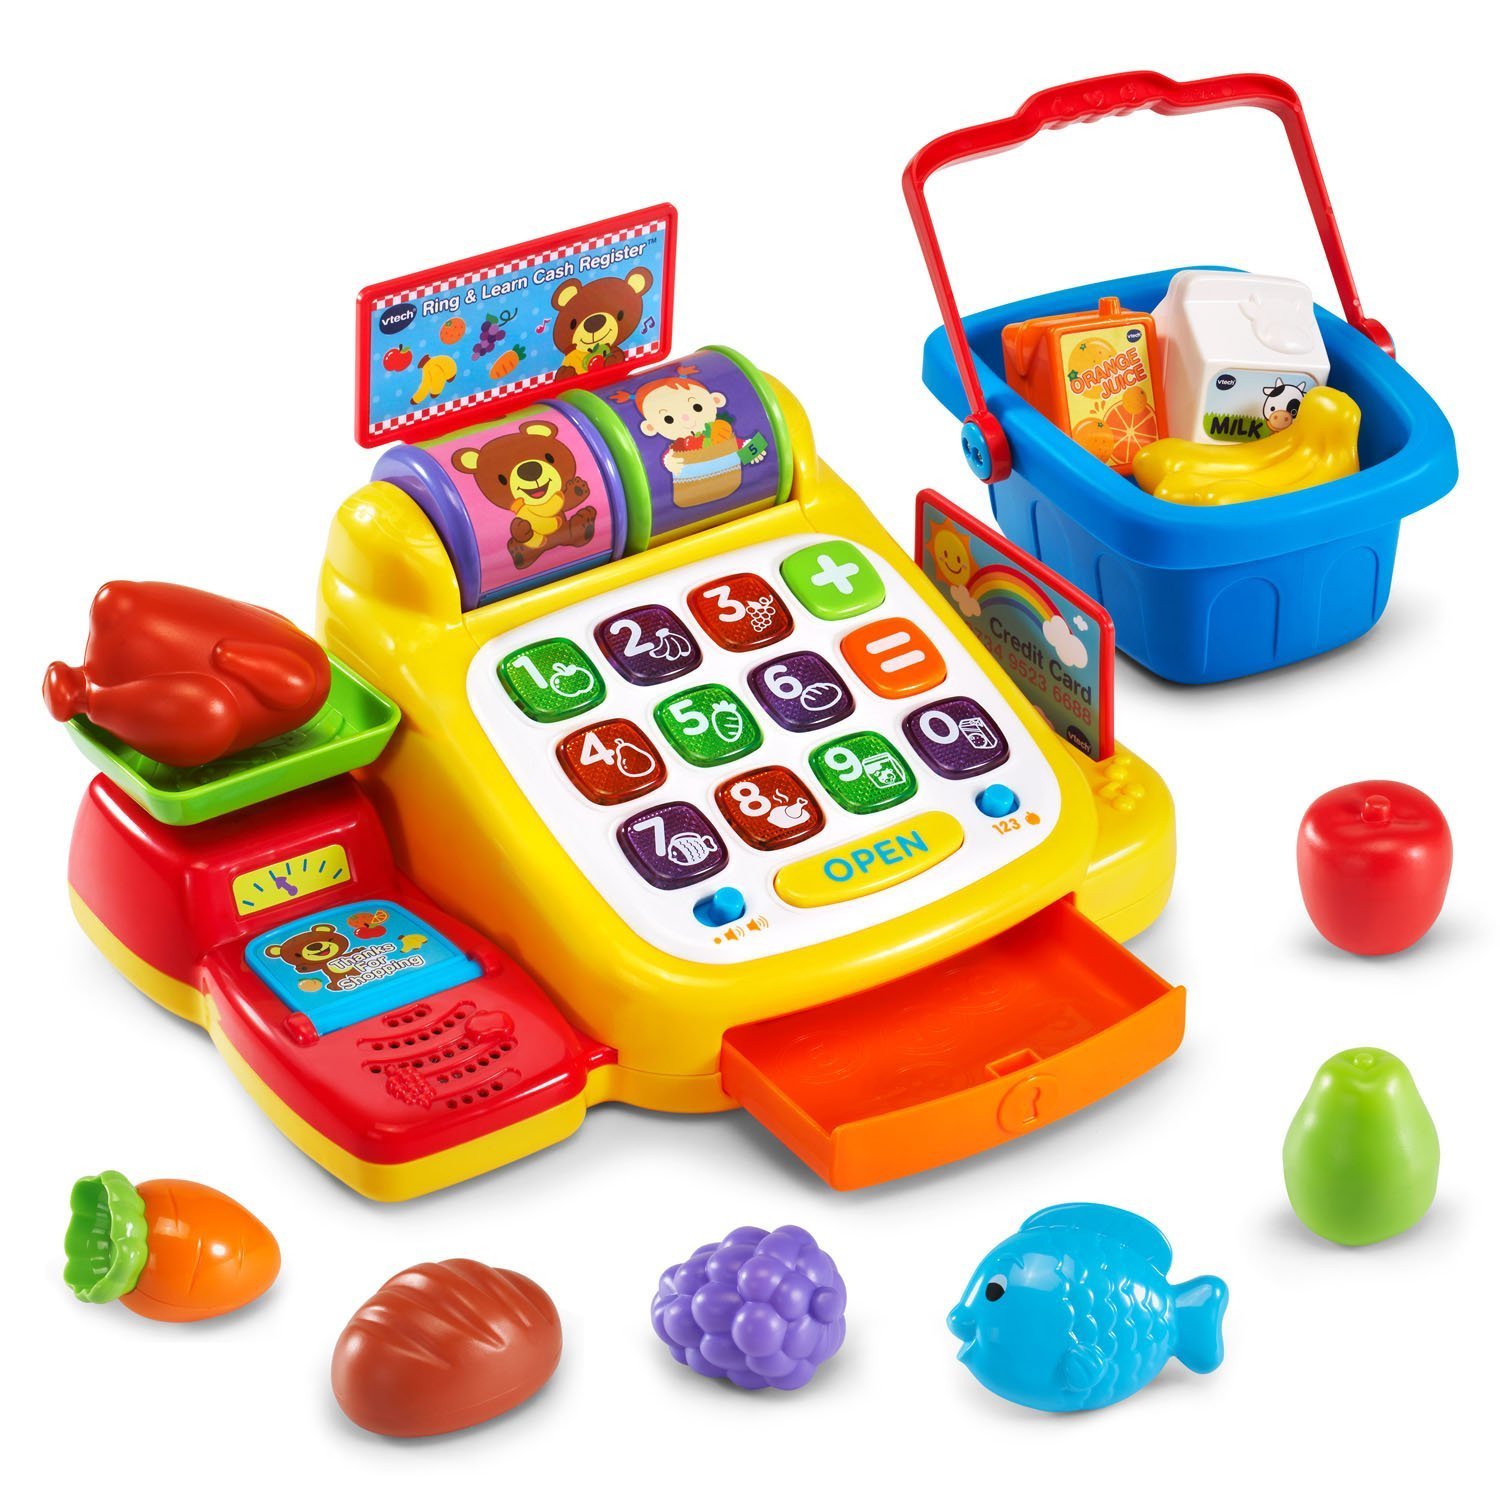 VTech Ring and Learn Cash Register – Just $14.98!